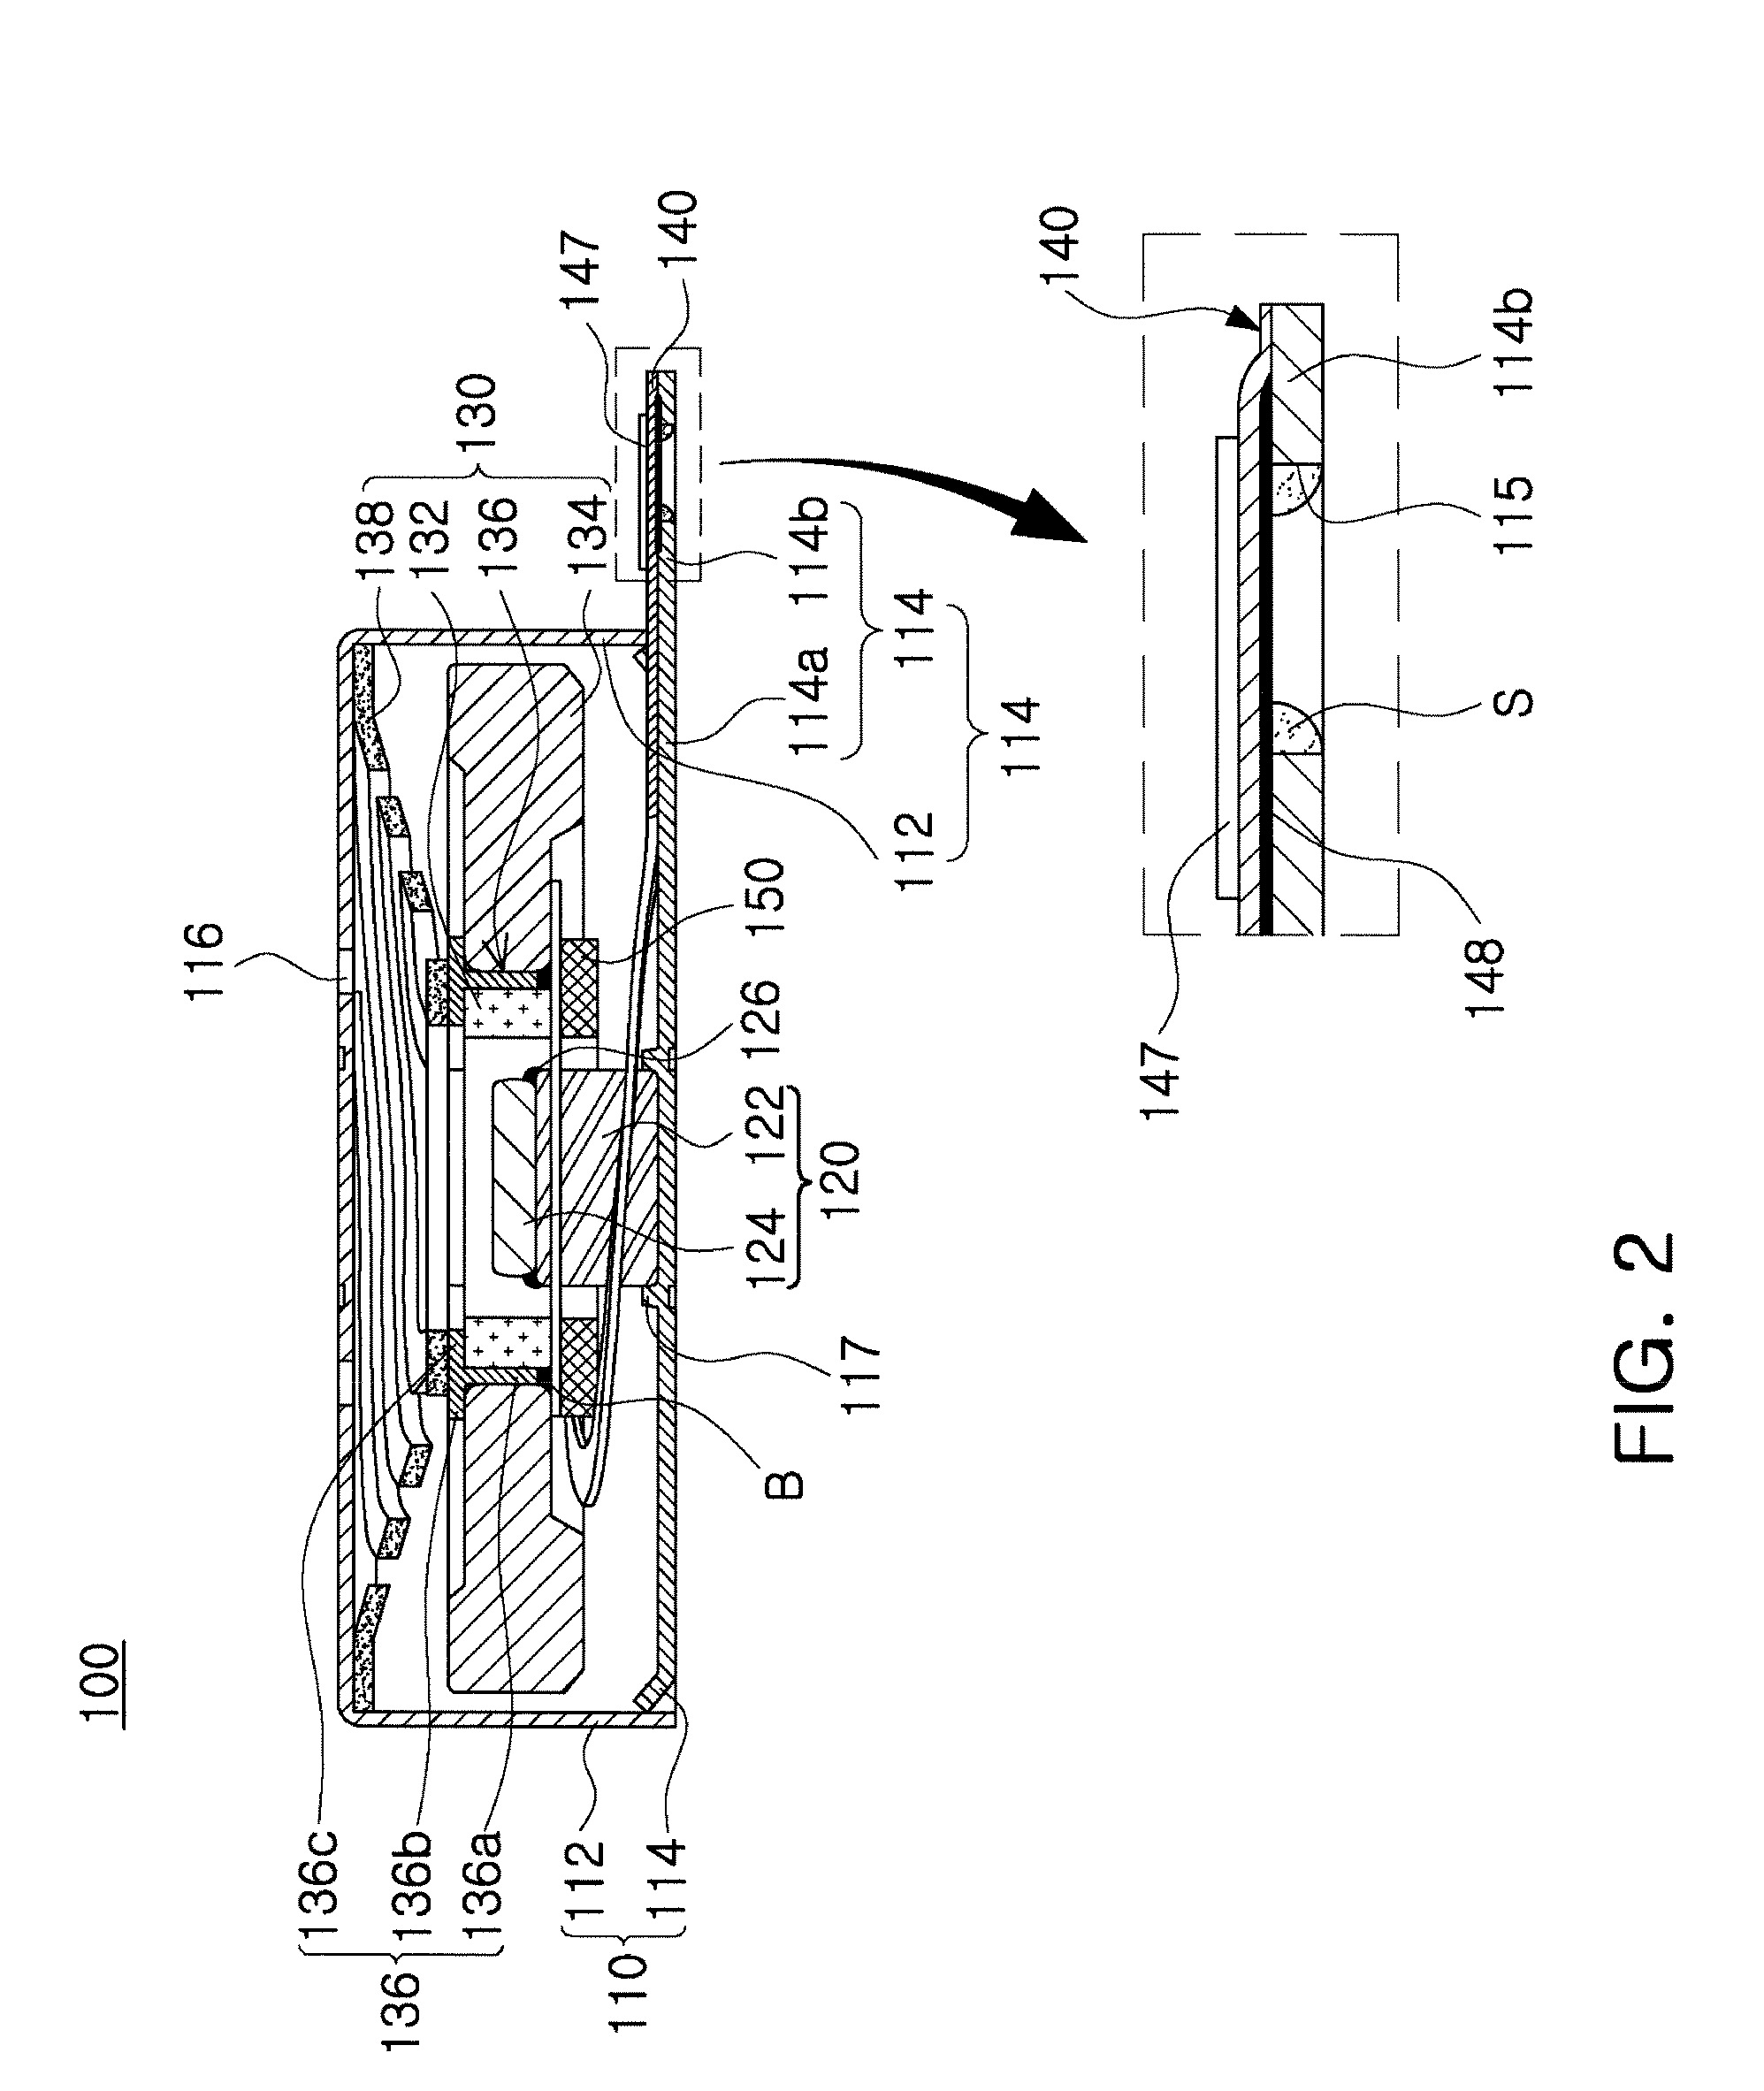 Linear vibrator having exposure hole or groove in the cover